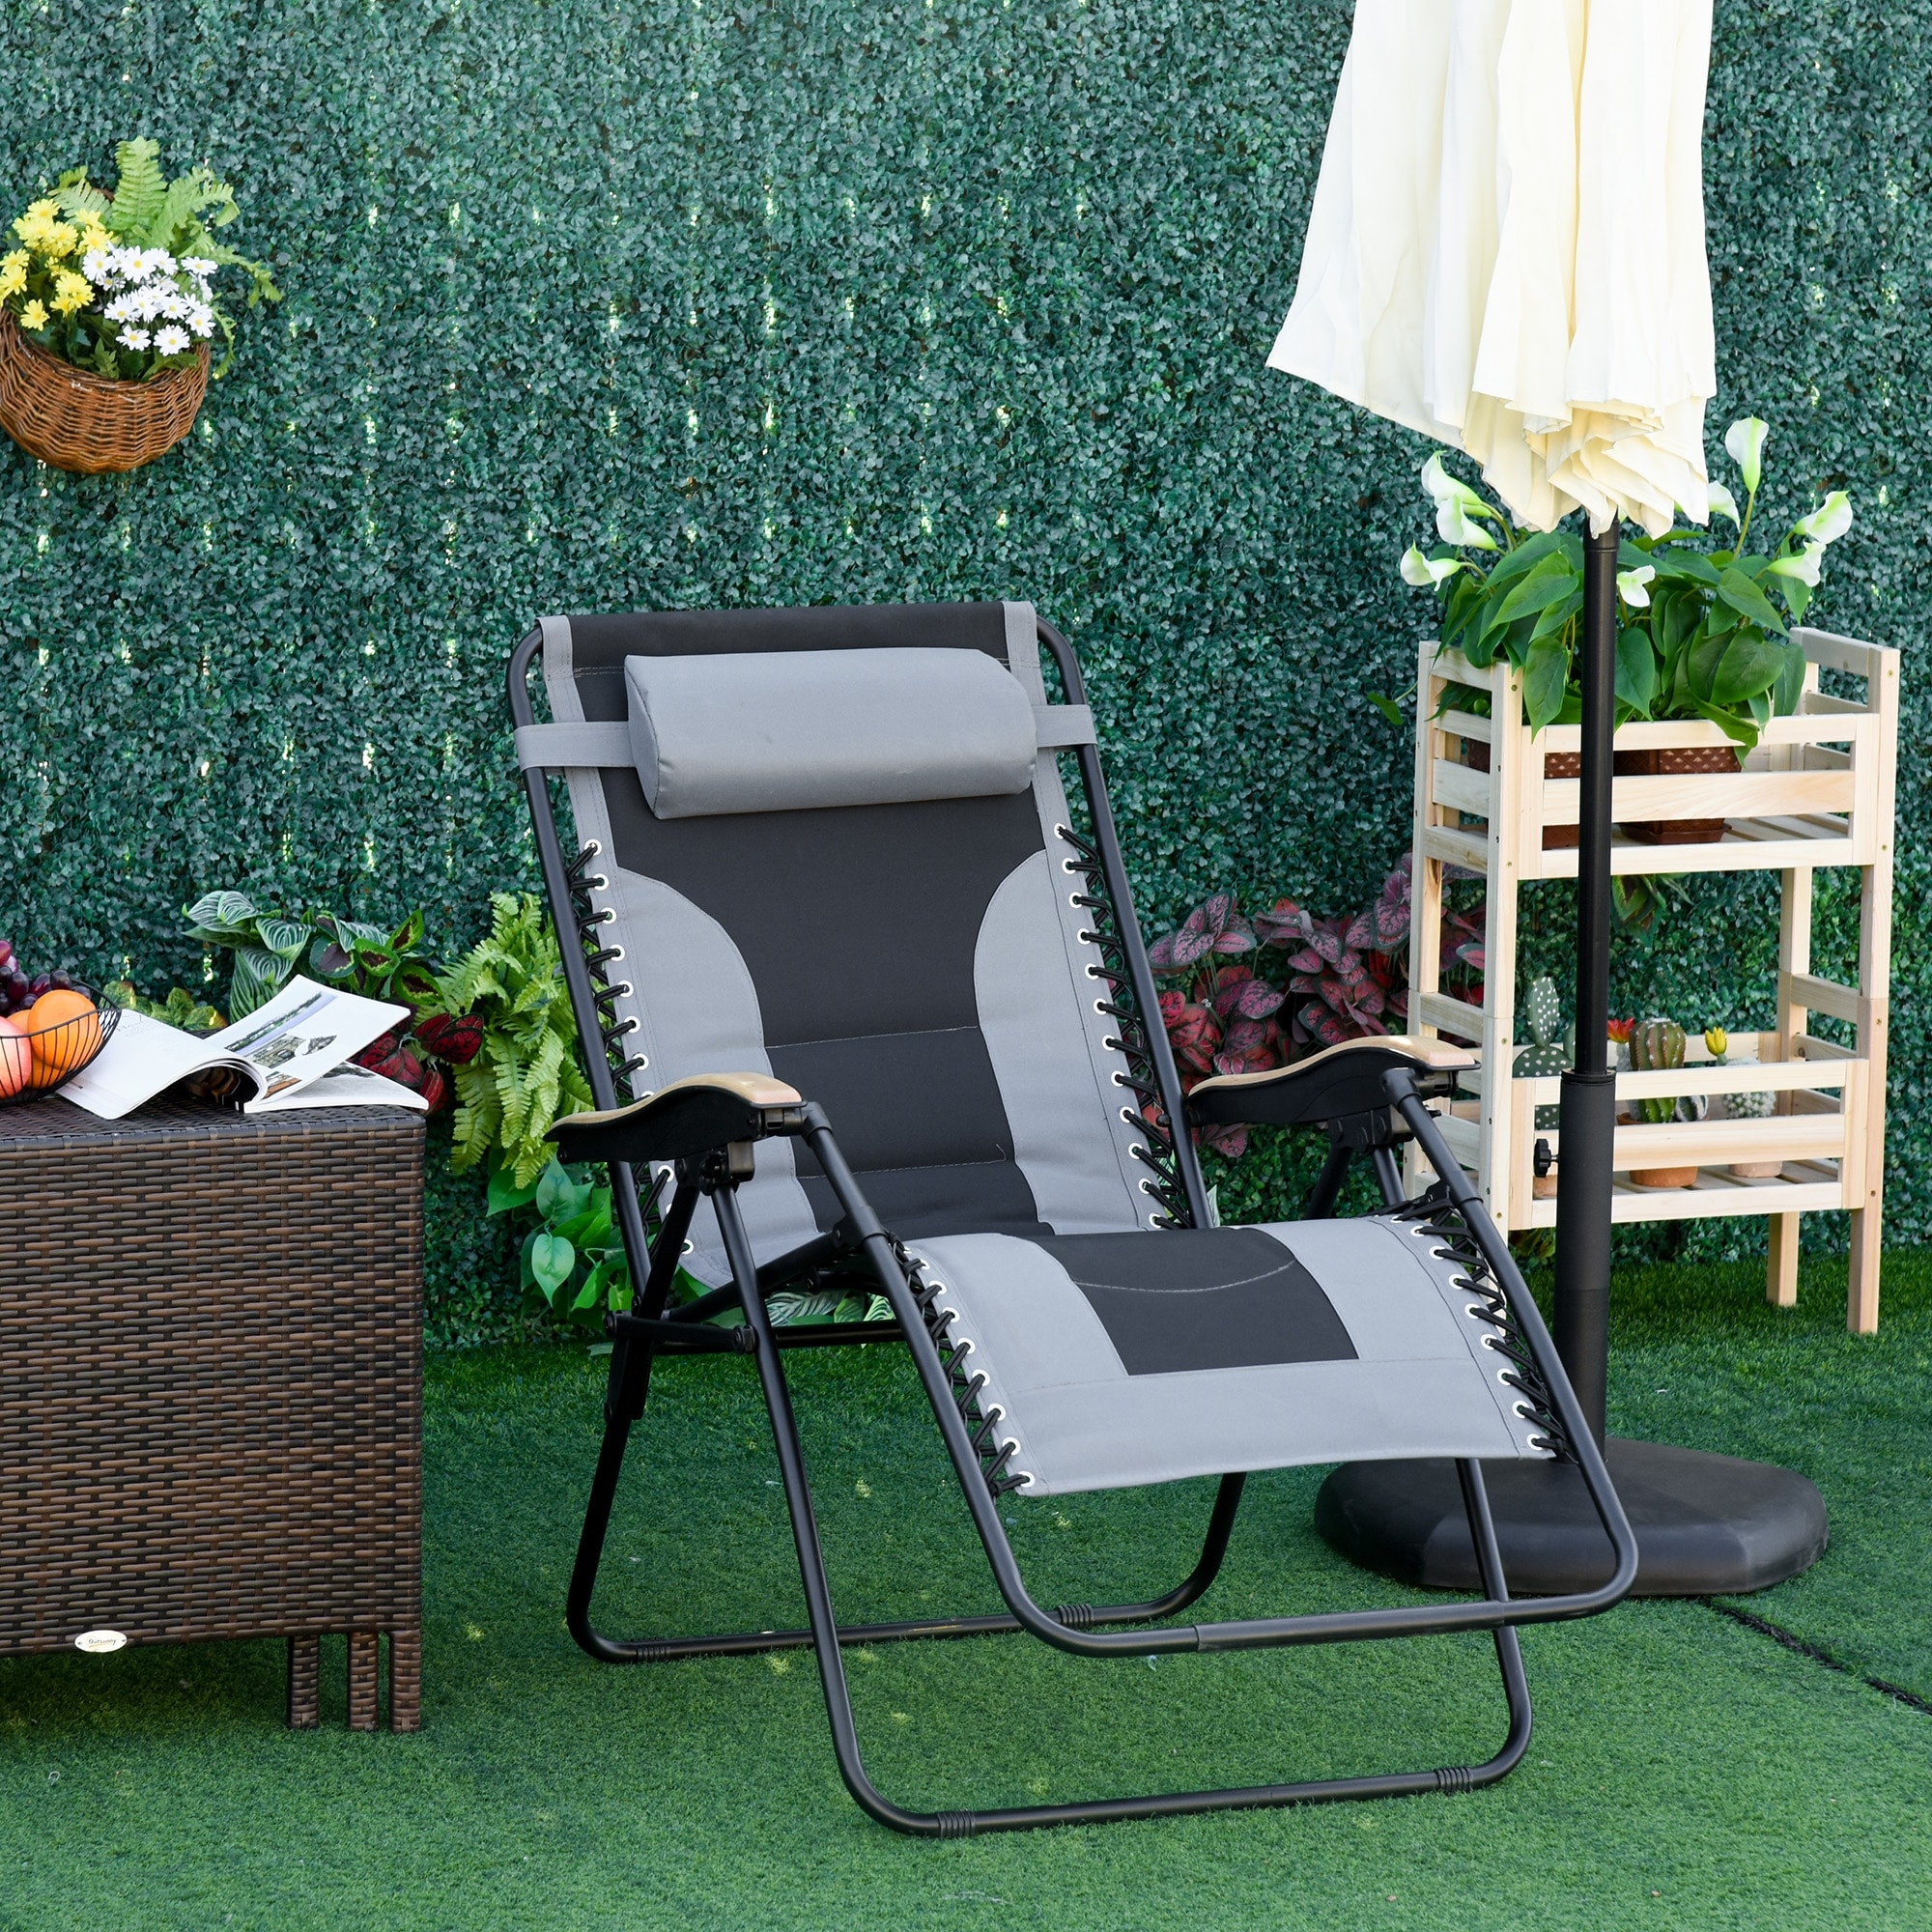 https://ak1.ostkcdn.com/images/products/is/images/direct/94cafd7bd4f2f555e3a2b0c6ab423635b7475de4/Outsunny-Adjustable-Zero-Gravity-Lounge-Chair-with-a-Folding-Design%2C-Convenient-Cup-Holders%2C-%26-Durable-Material.jpg